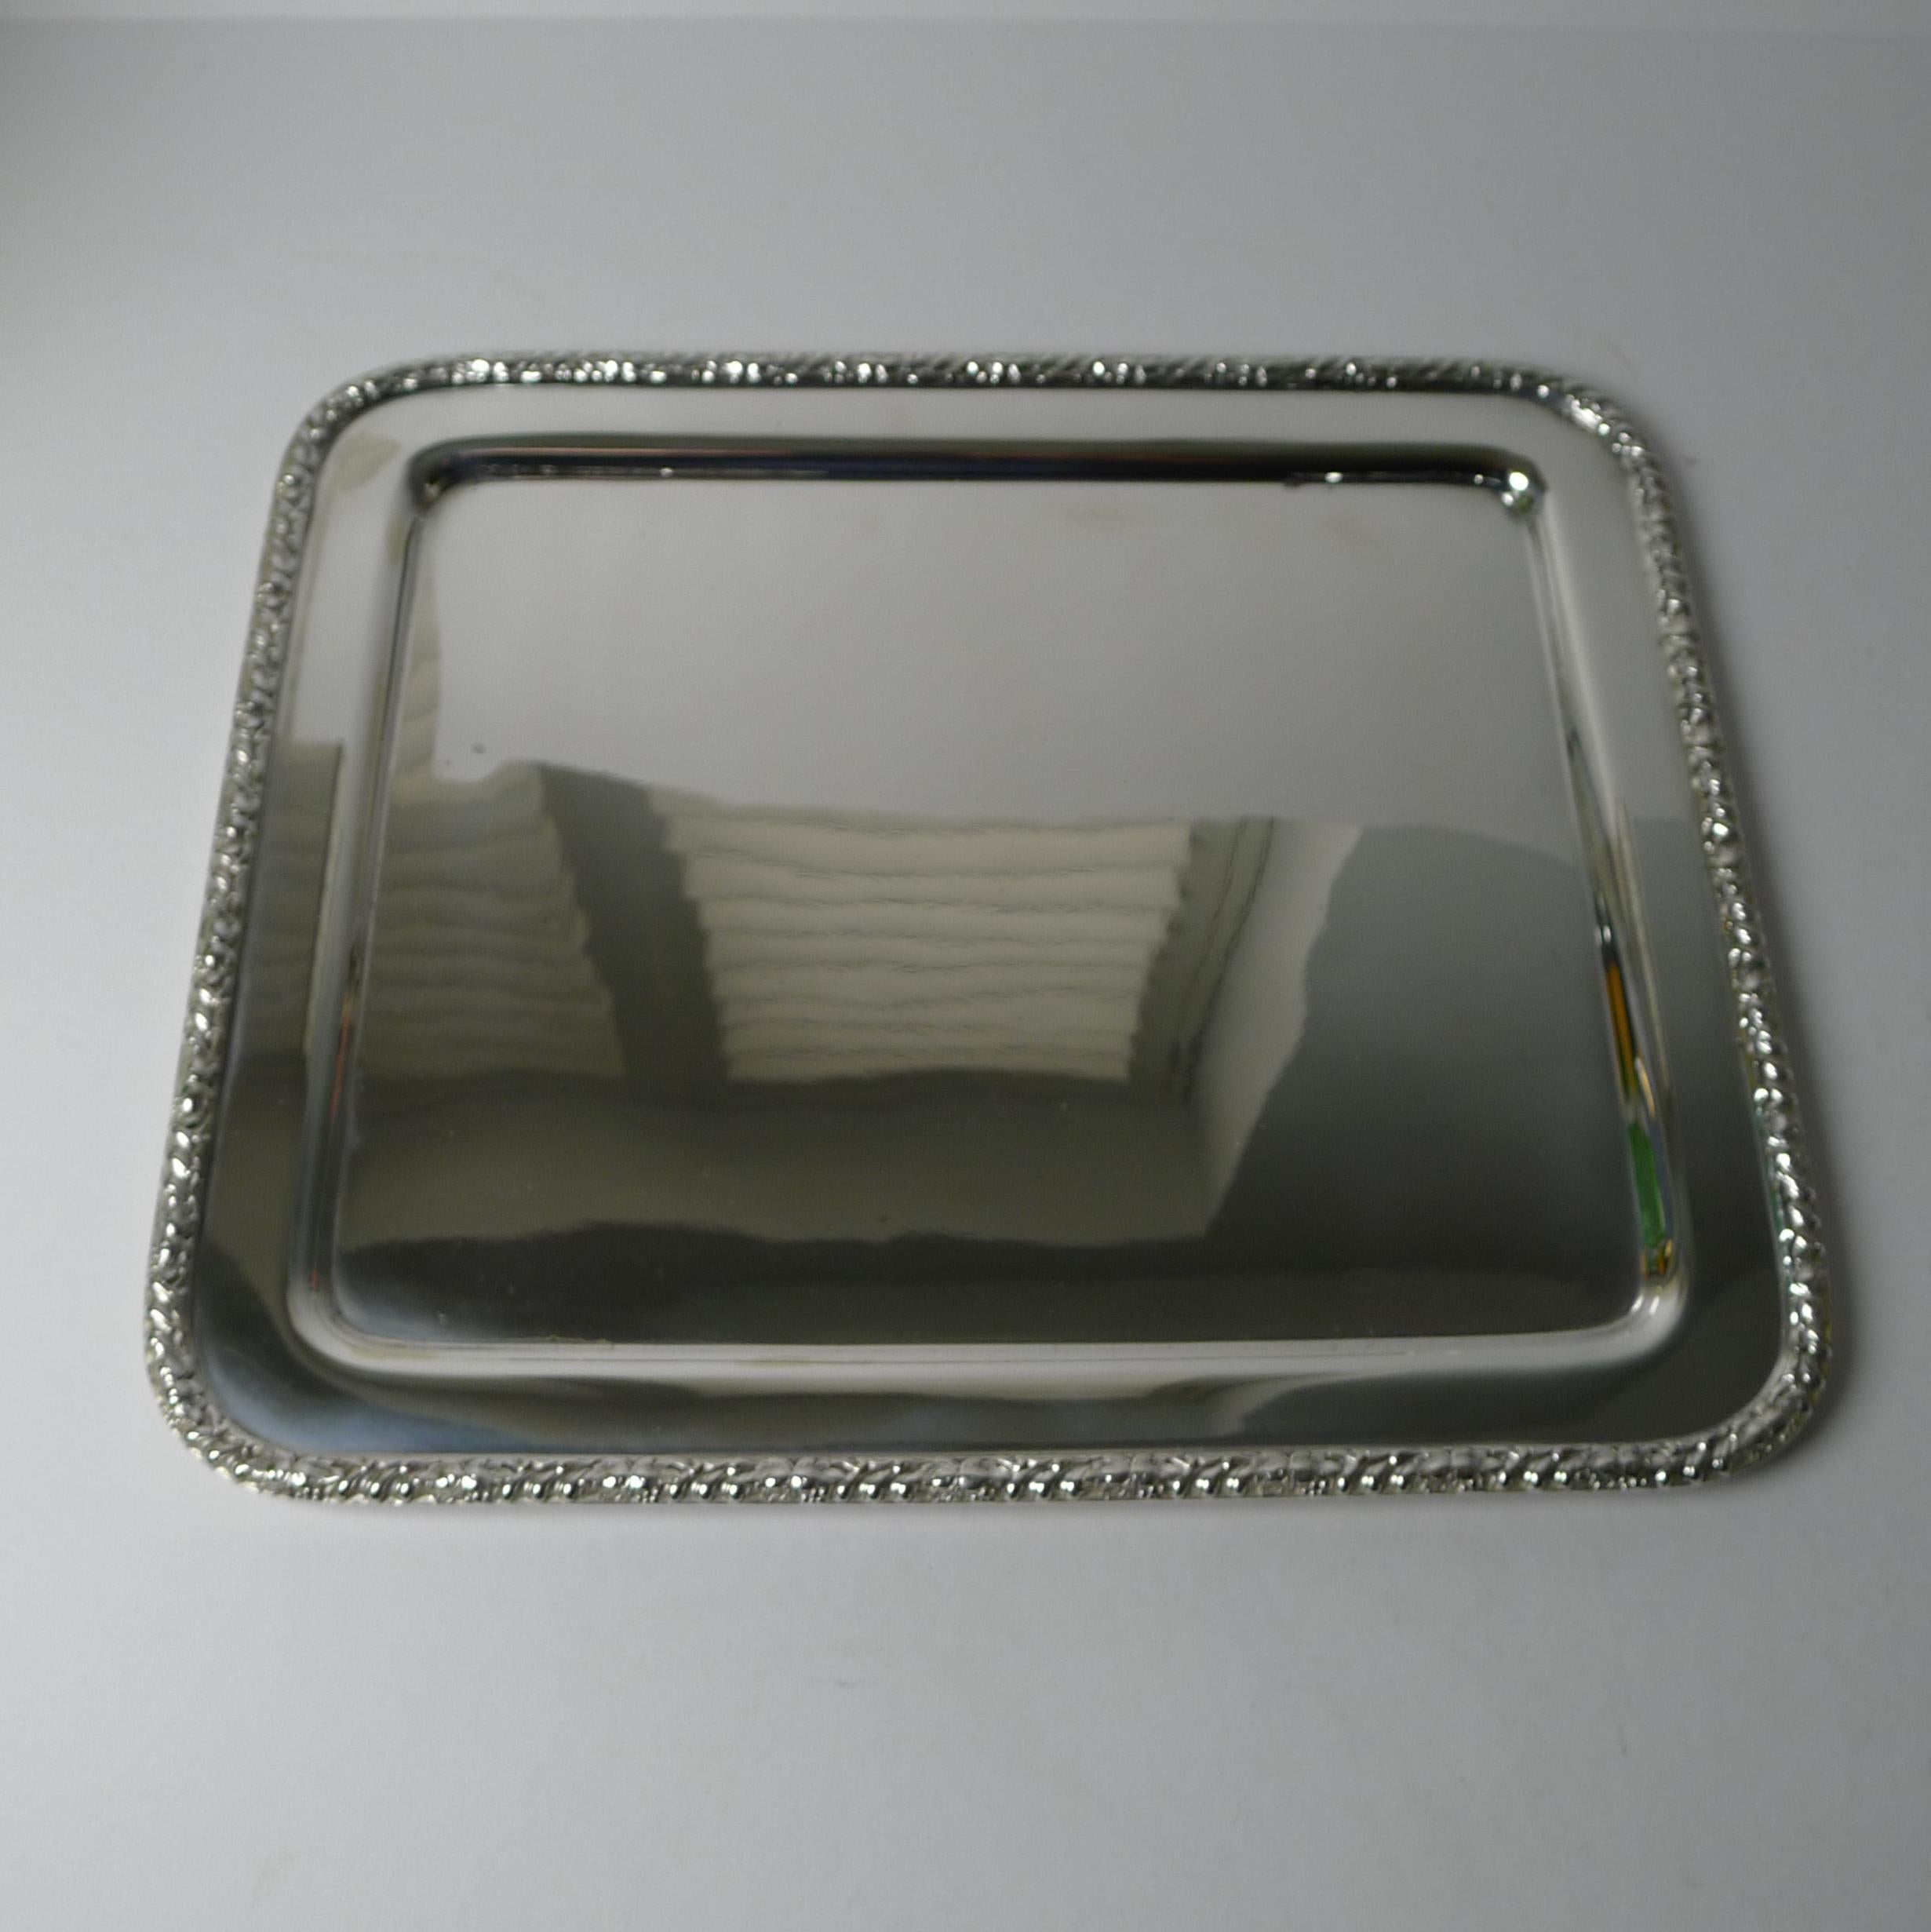 Edwardian Elegant English Silver Plated Cocktail Tray by Barker Brothers c.1900